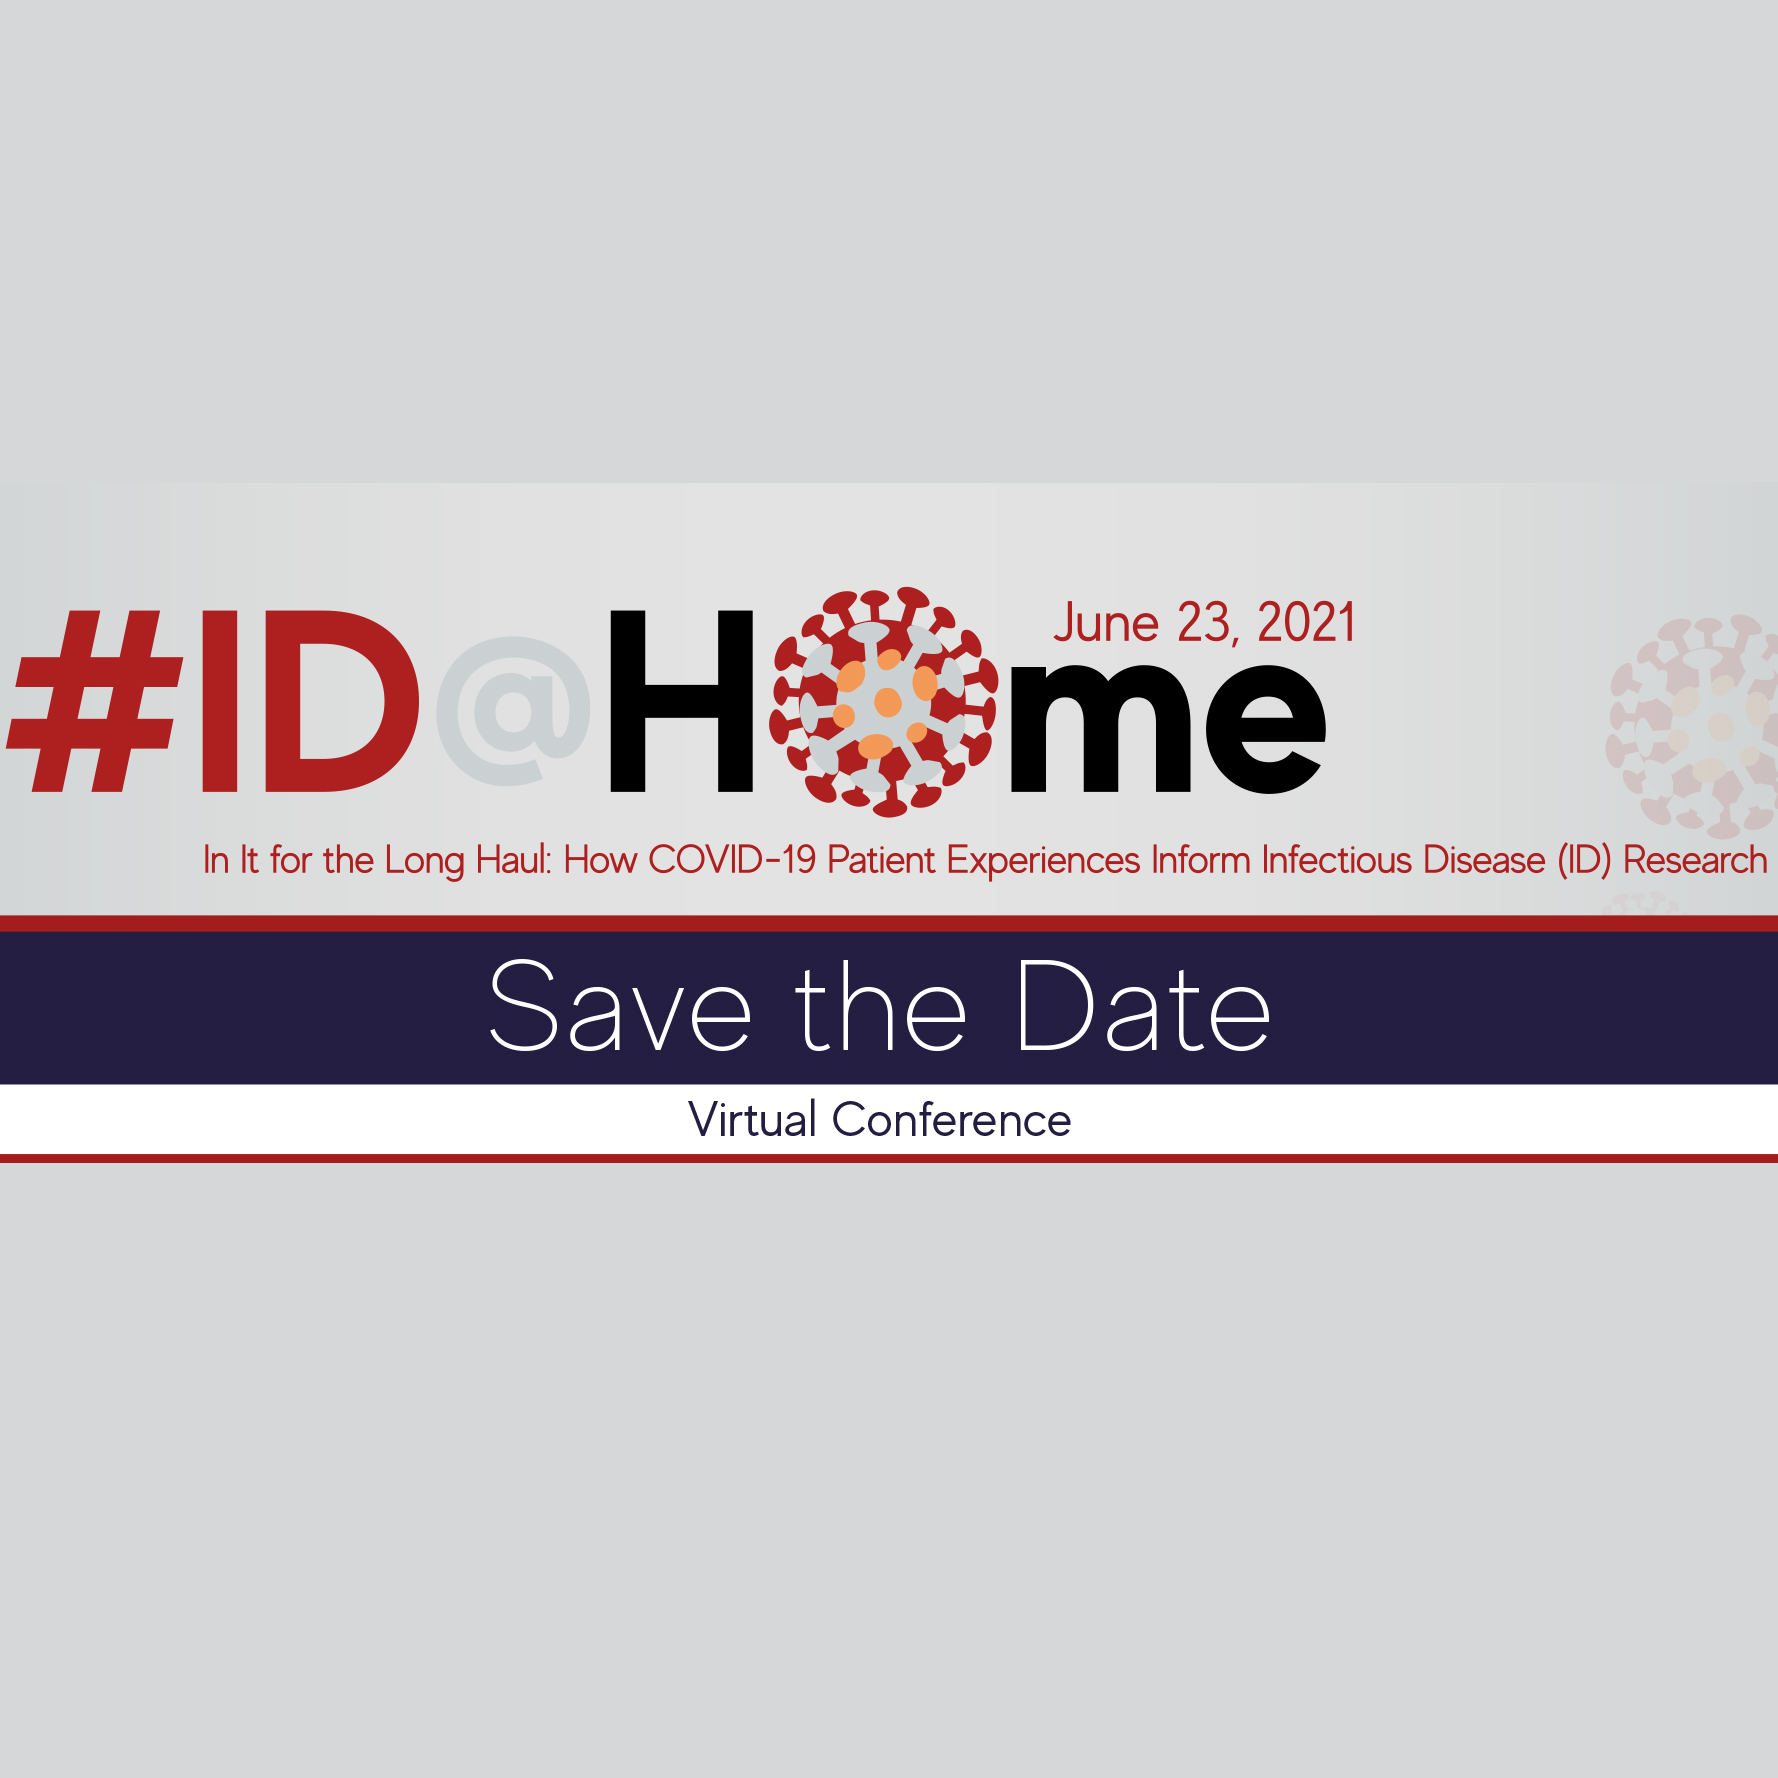 #ID@Home Flyer